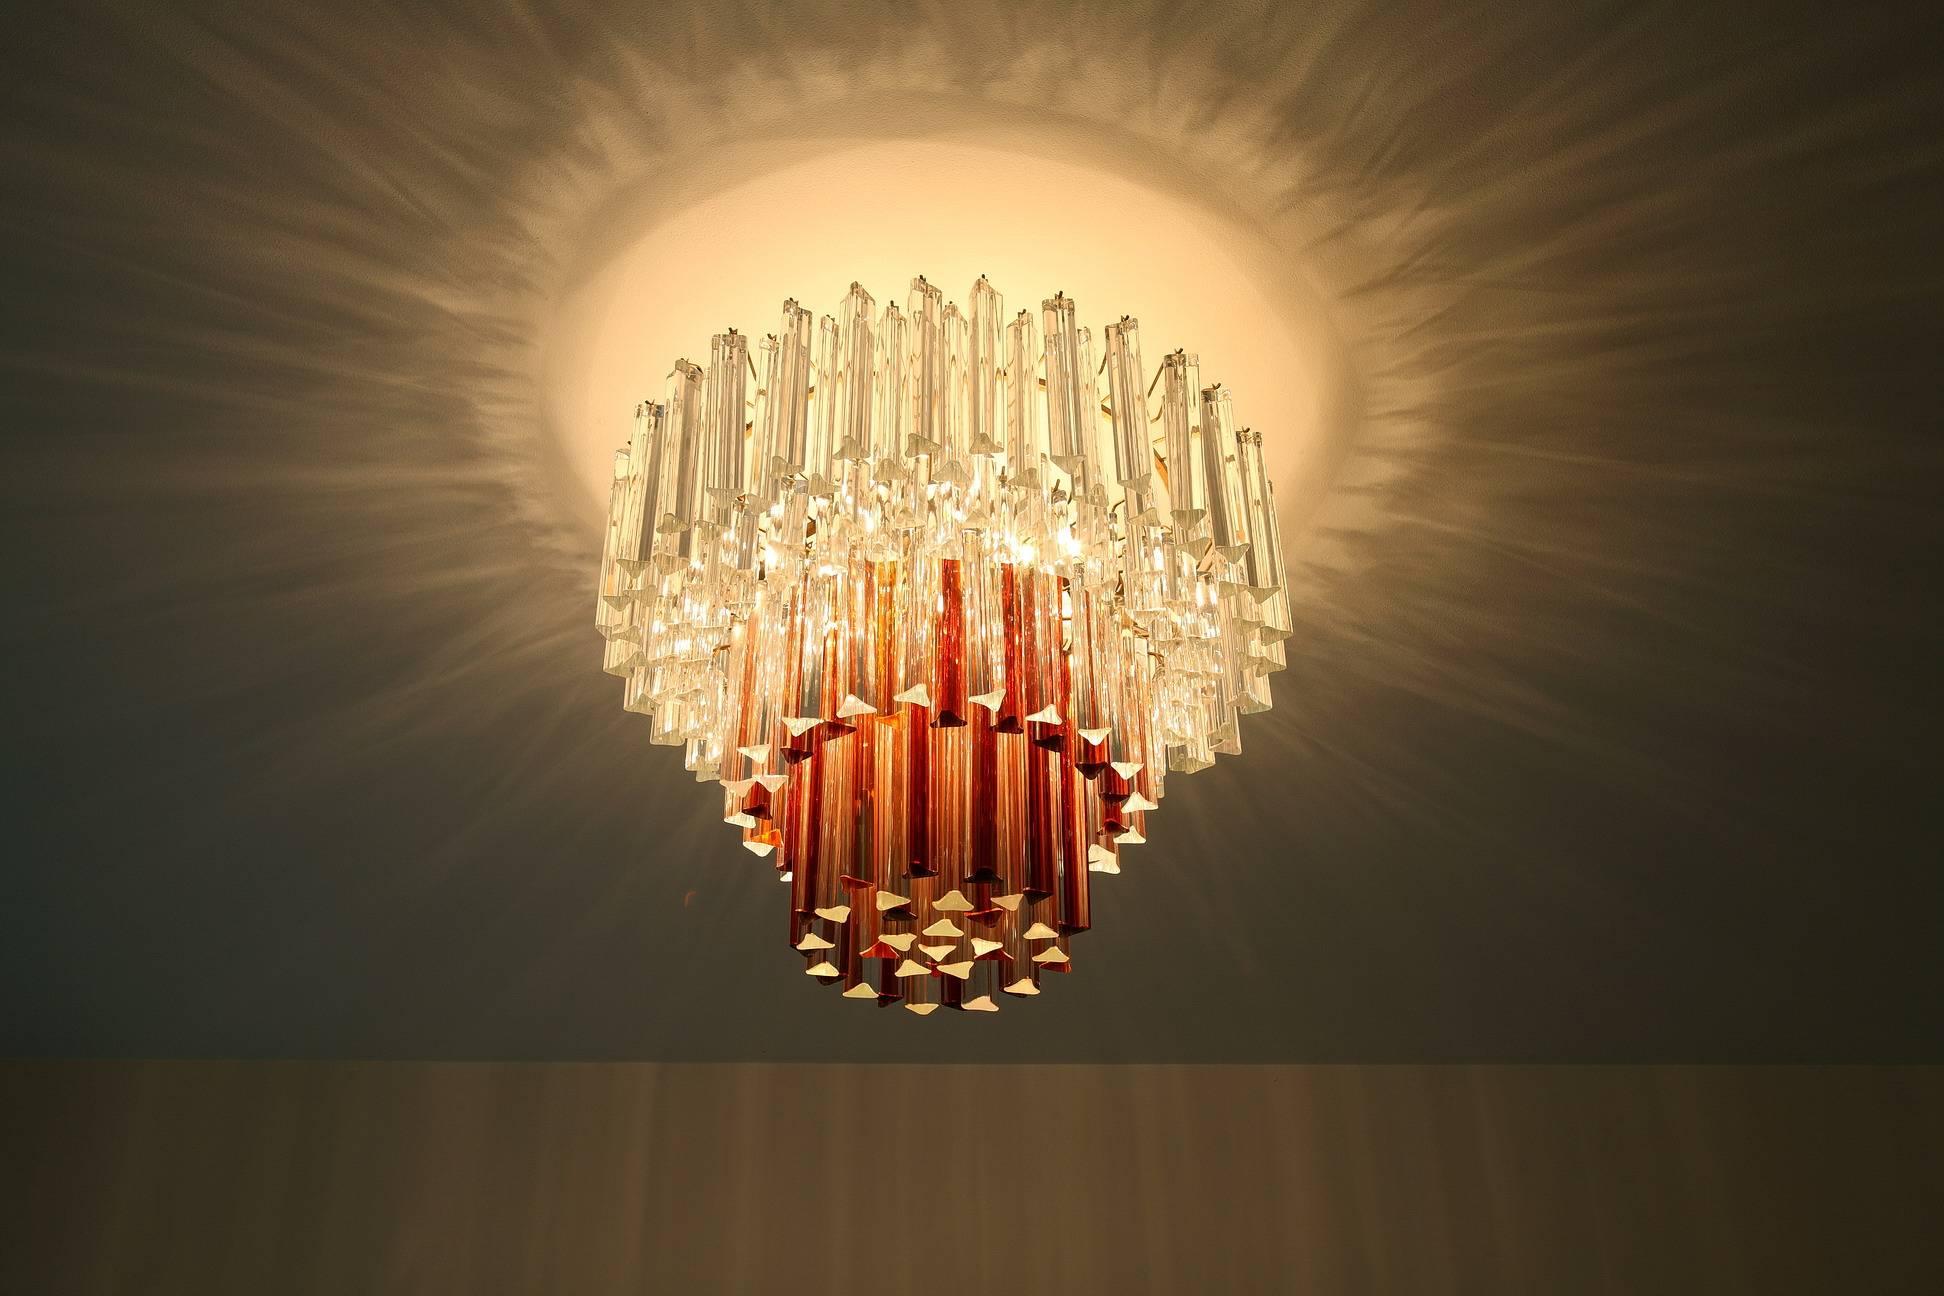 Circular ceiling lamp designed by Paolo Venini (Italian, 1895–1959) in the 1960s, with long red, orange and transparent Murano glass crystals on gilded metal mounts. Complete,


circa 1960.
Dimensions: W 23,6 in, D 23,6in, H 21,7in.
Dimensions: